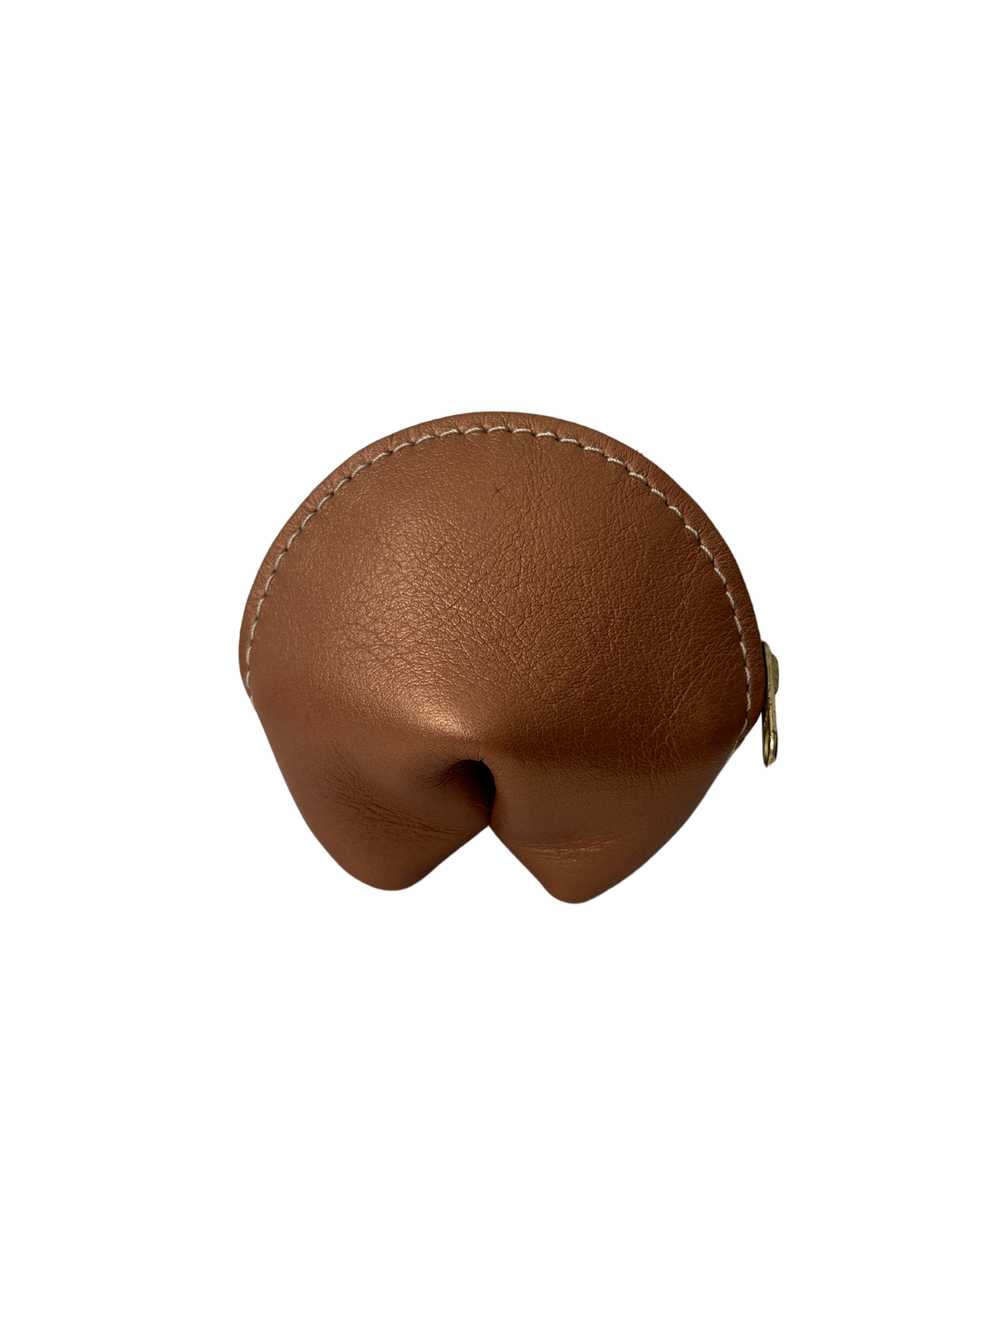 Portland Leather Fortune Cookie Pouch - image 5